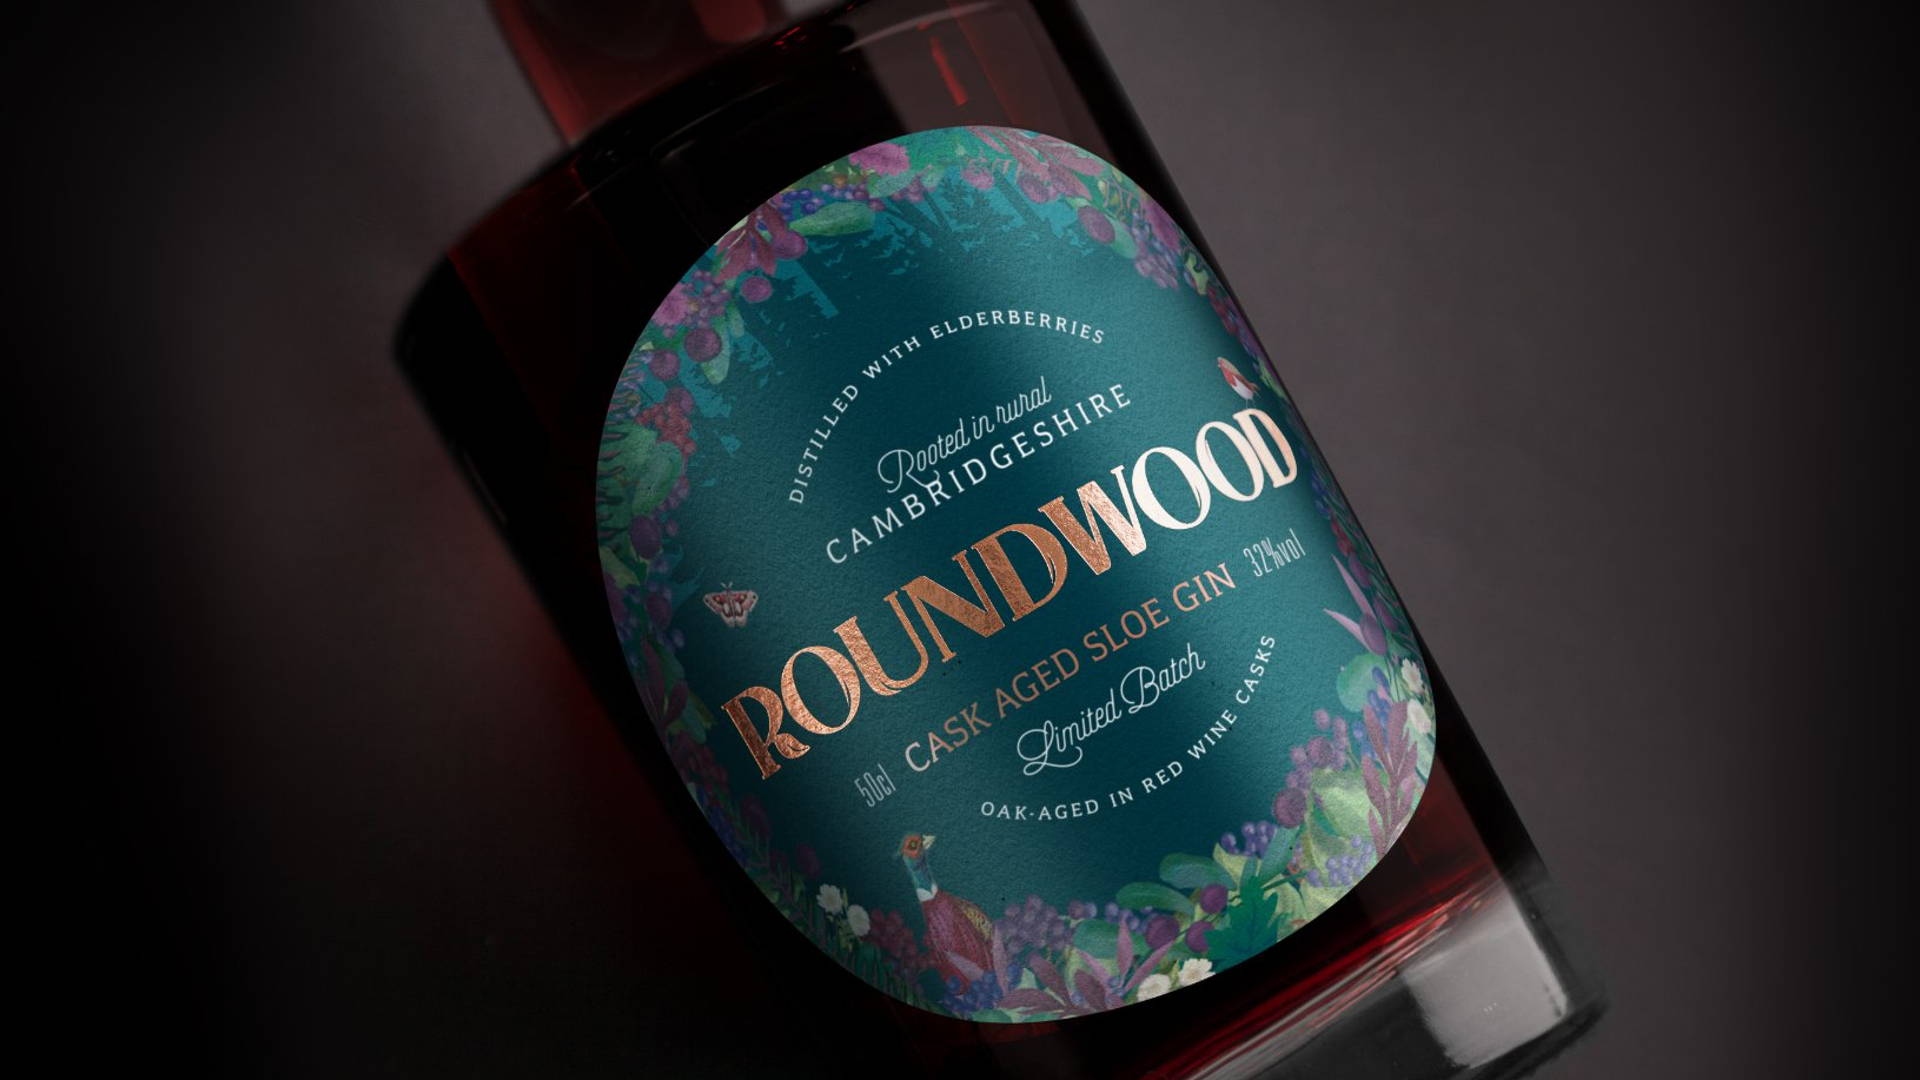 Featured image for Agency Butterfly Cannon Designs Bottle Inspired By Forest Near RoundWood Gin's Distillery